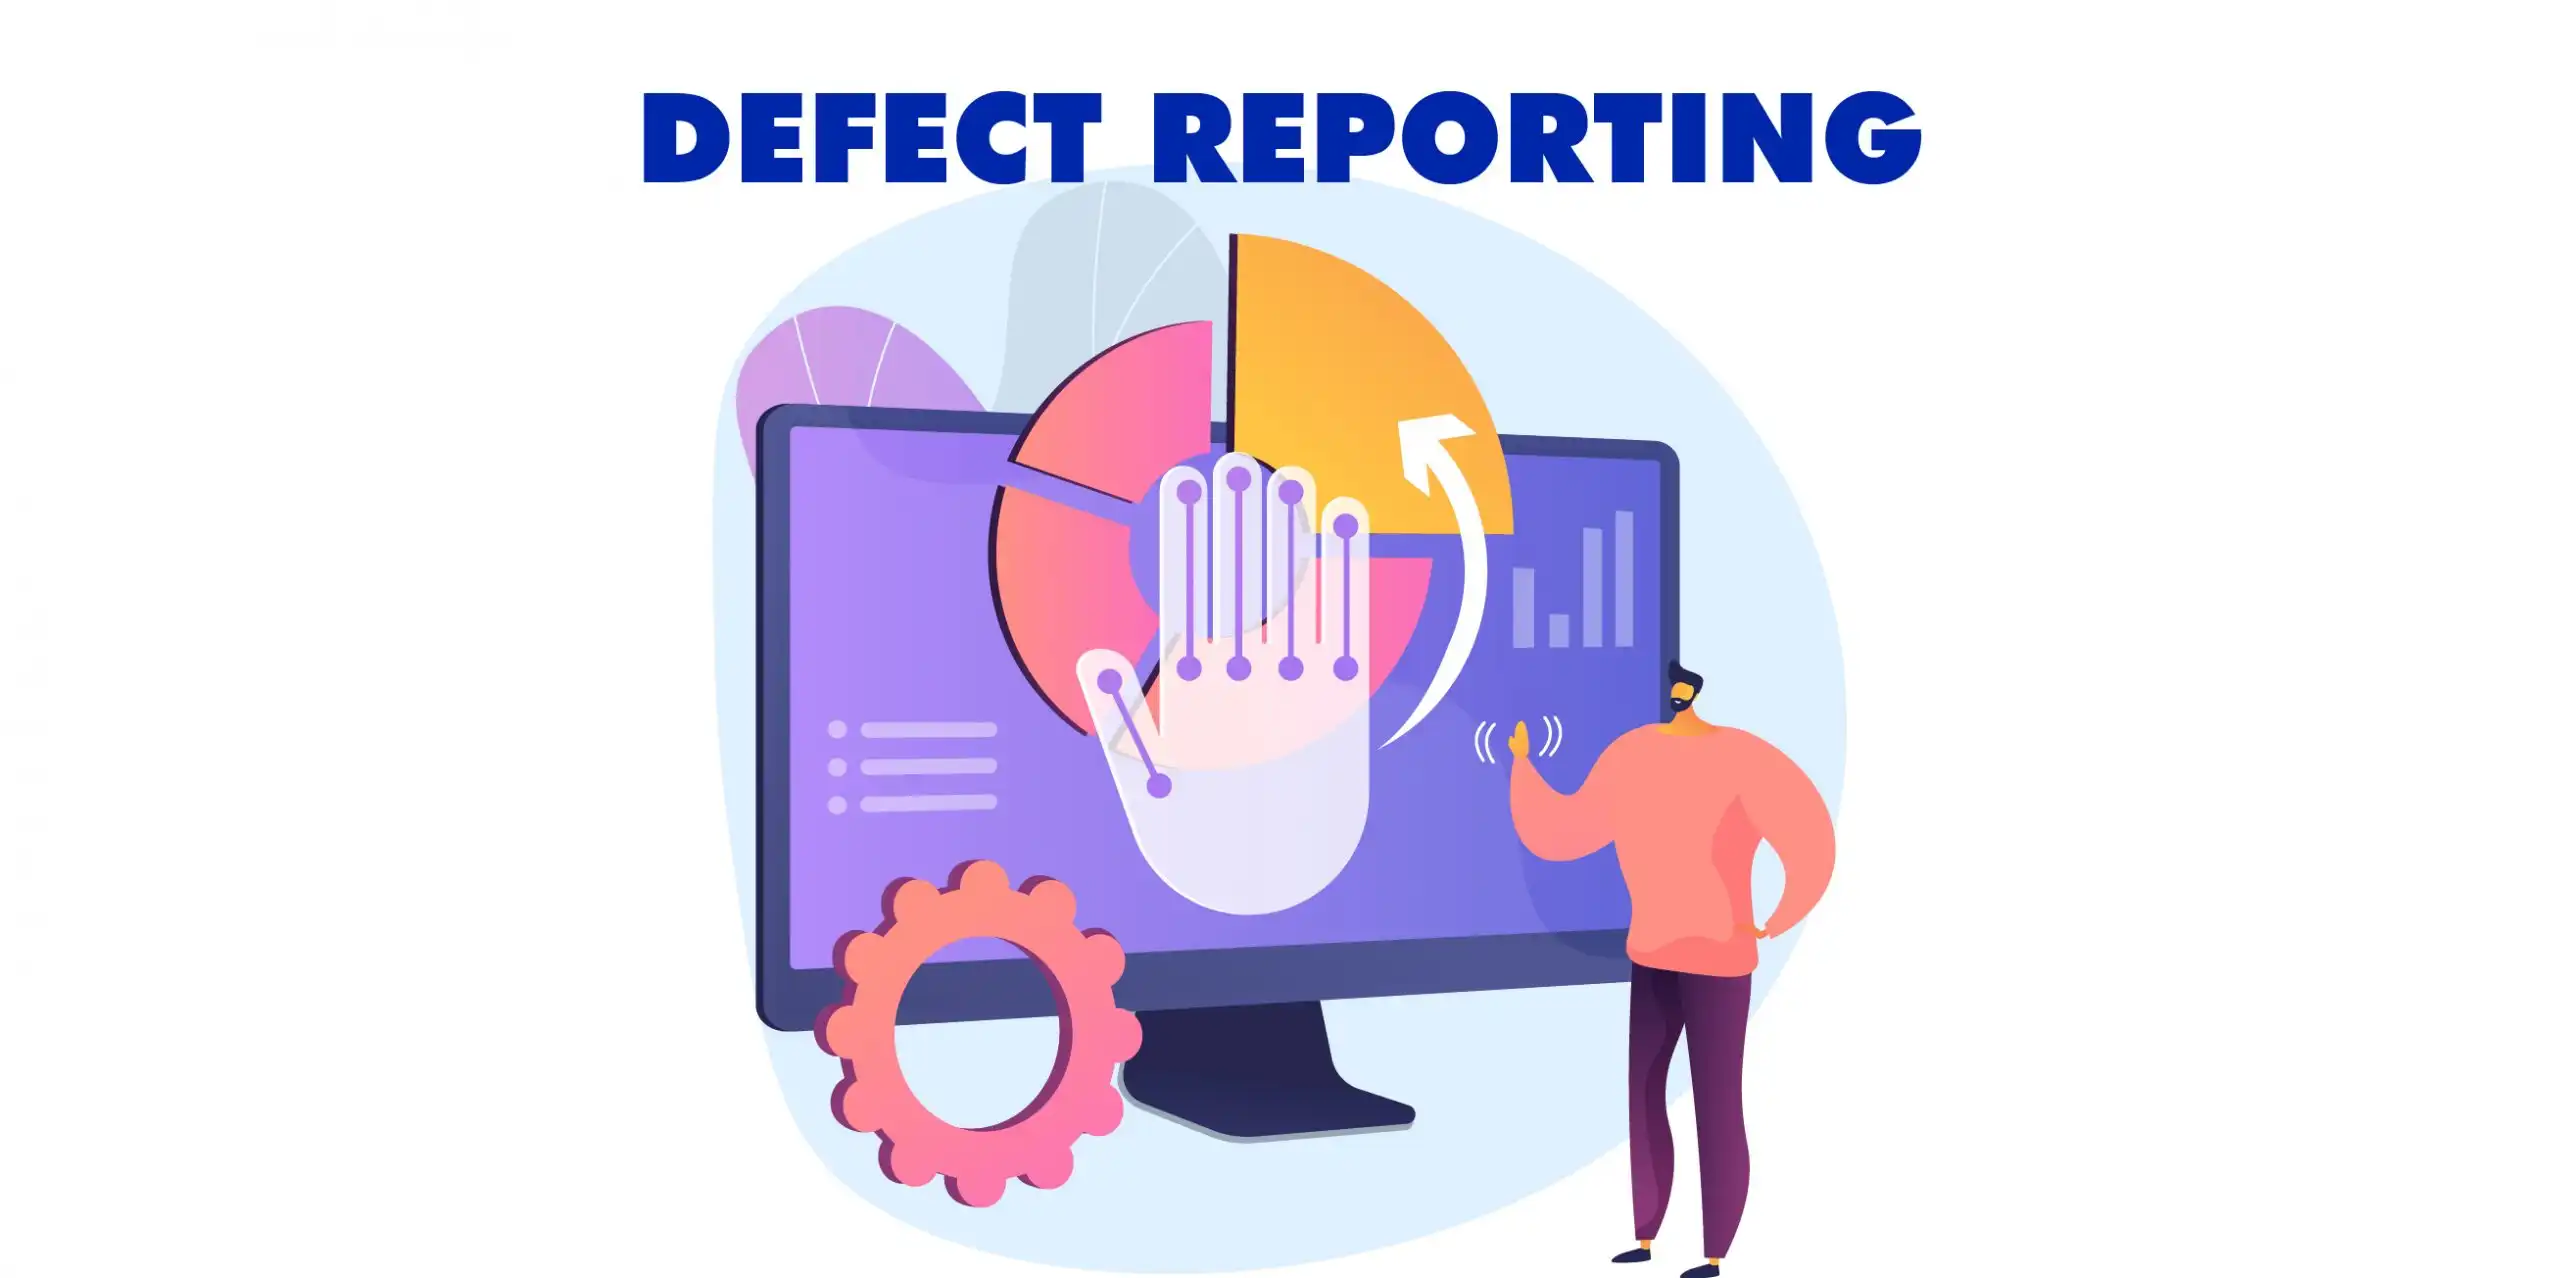 Defect Reporting Process